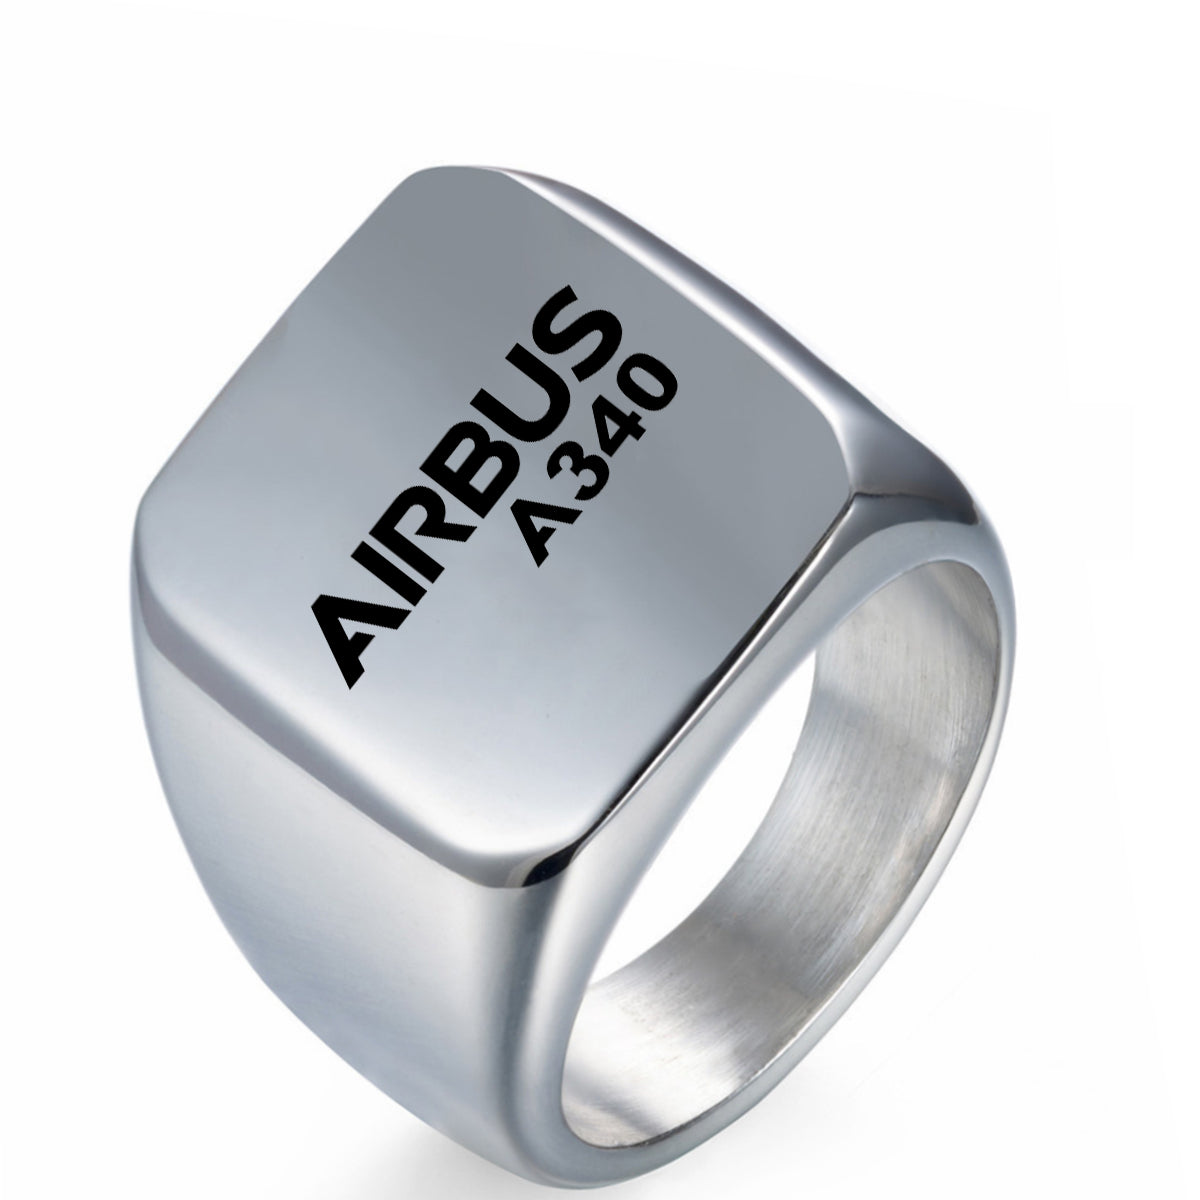 Airbus A340 & Text Designed Men Rings